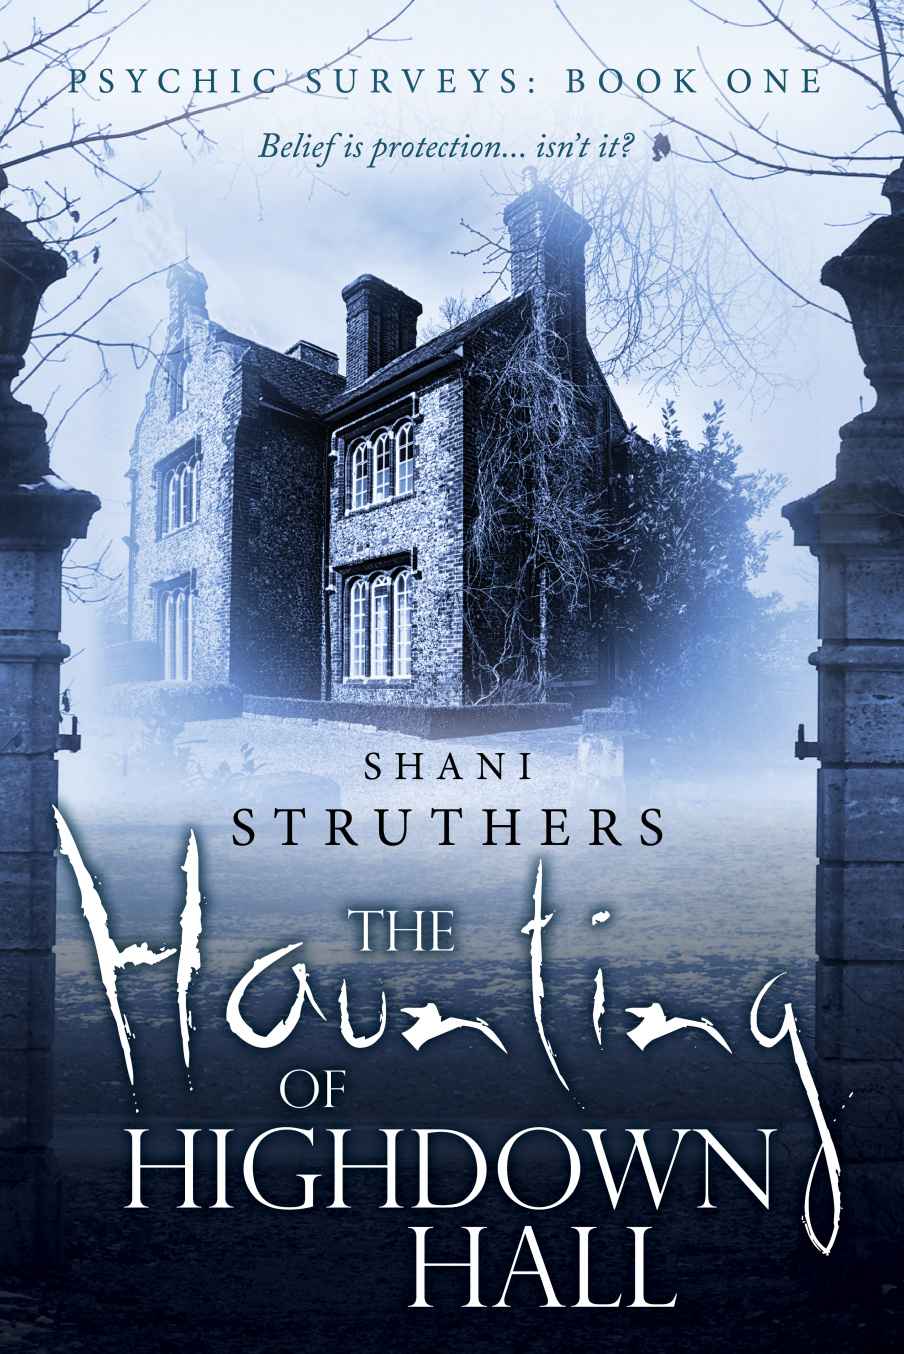 The Haunting of Highdown Hall